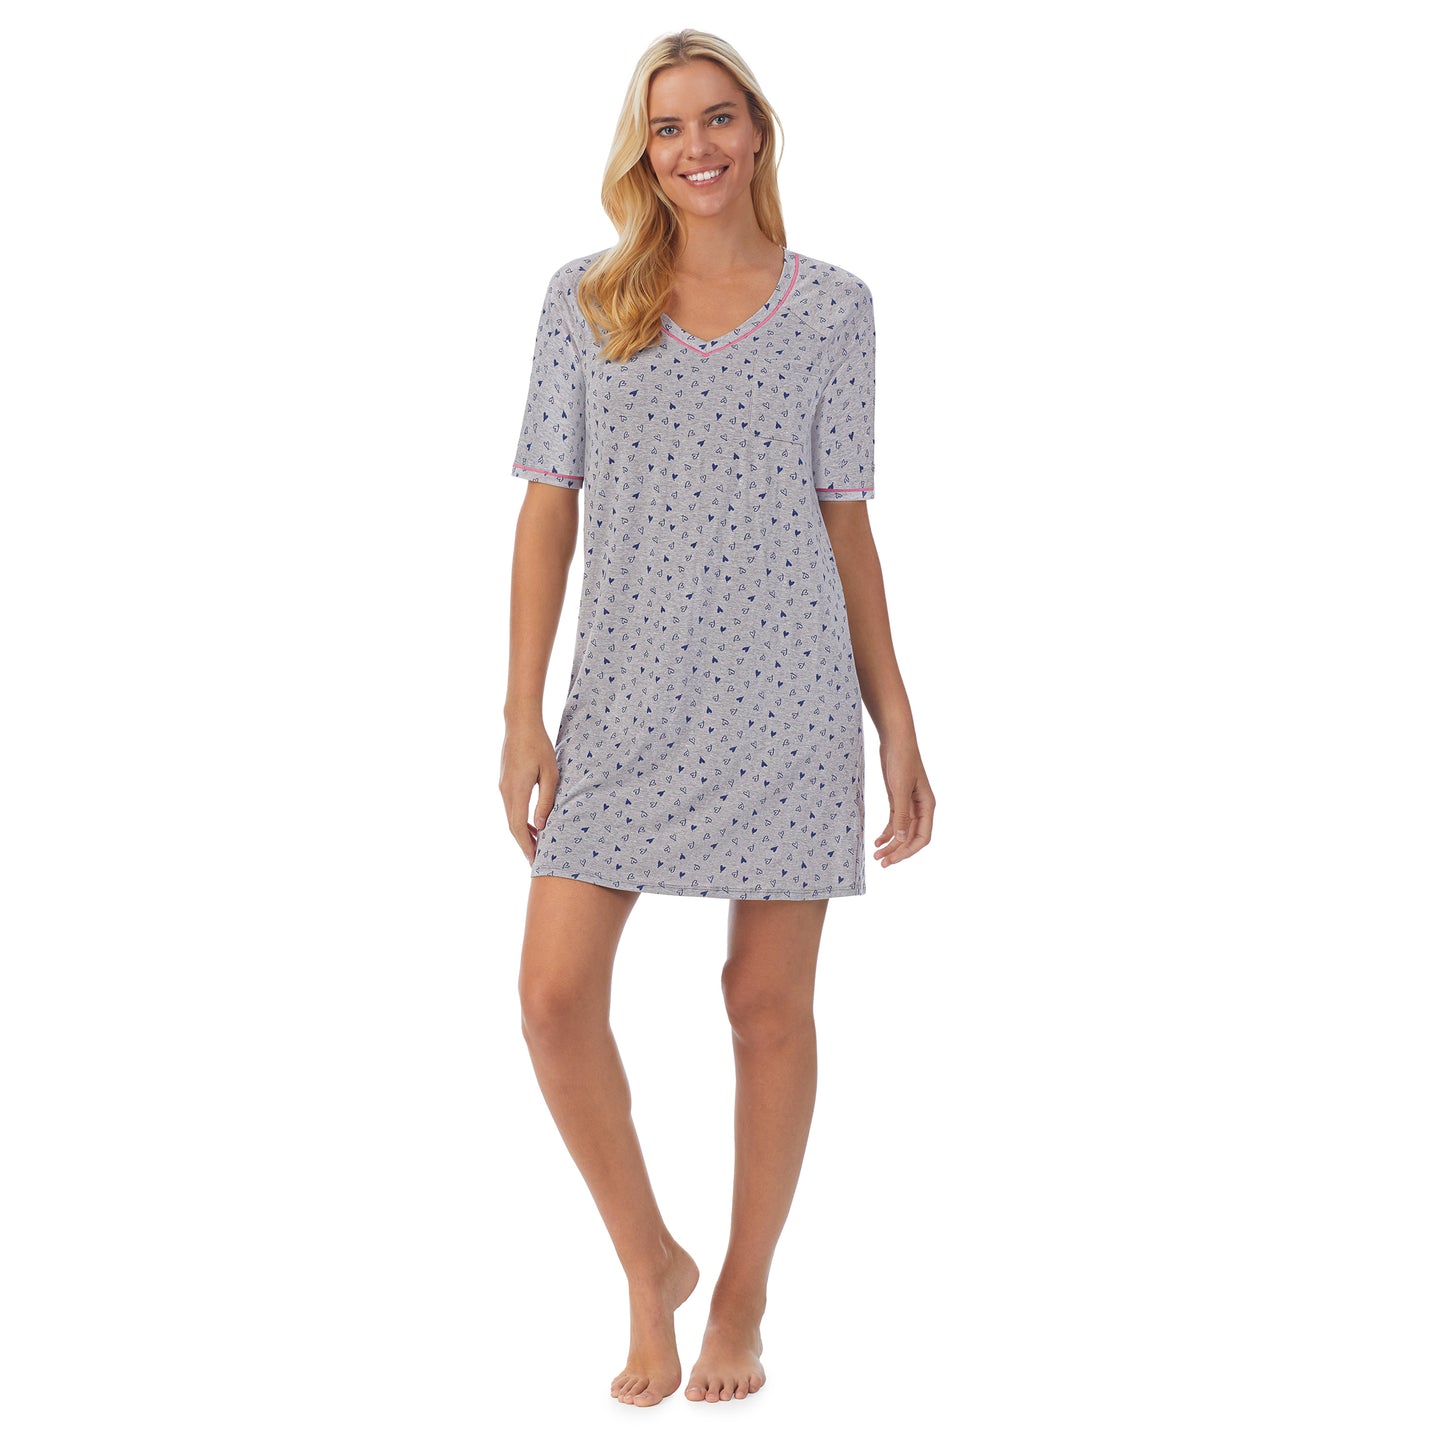 Heather Hearts; Model is wearing size S. She is 5'9", Bust 34", Waist 26", Hips 36".@ A lady wearingCuddl Smart Elbow Sleeve Sleep Tee with Heather Hearts print